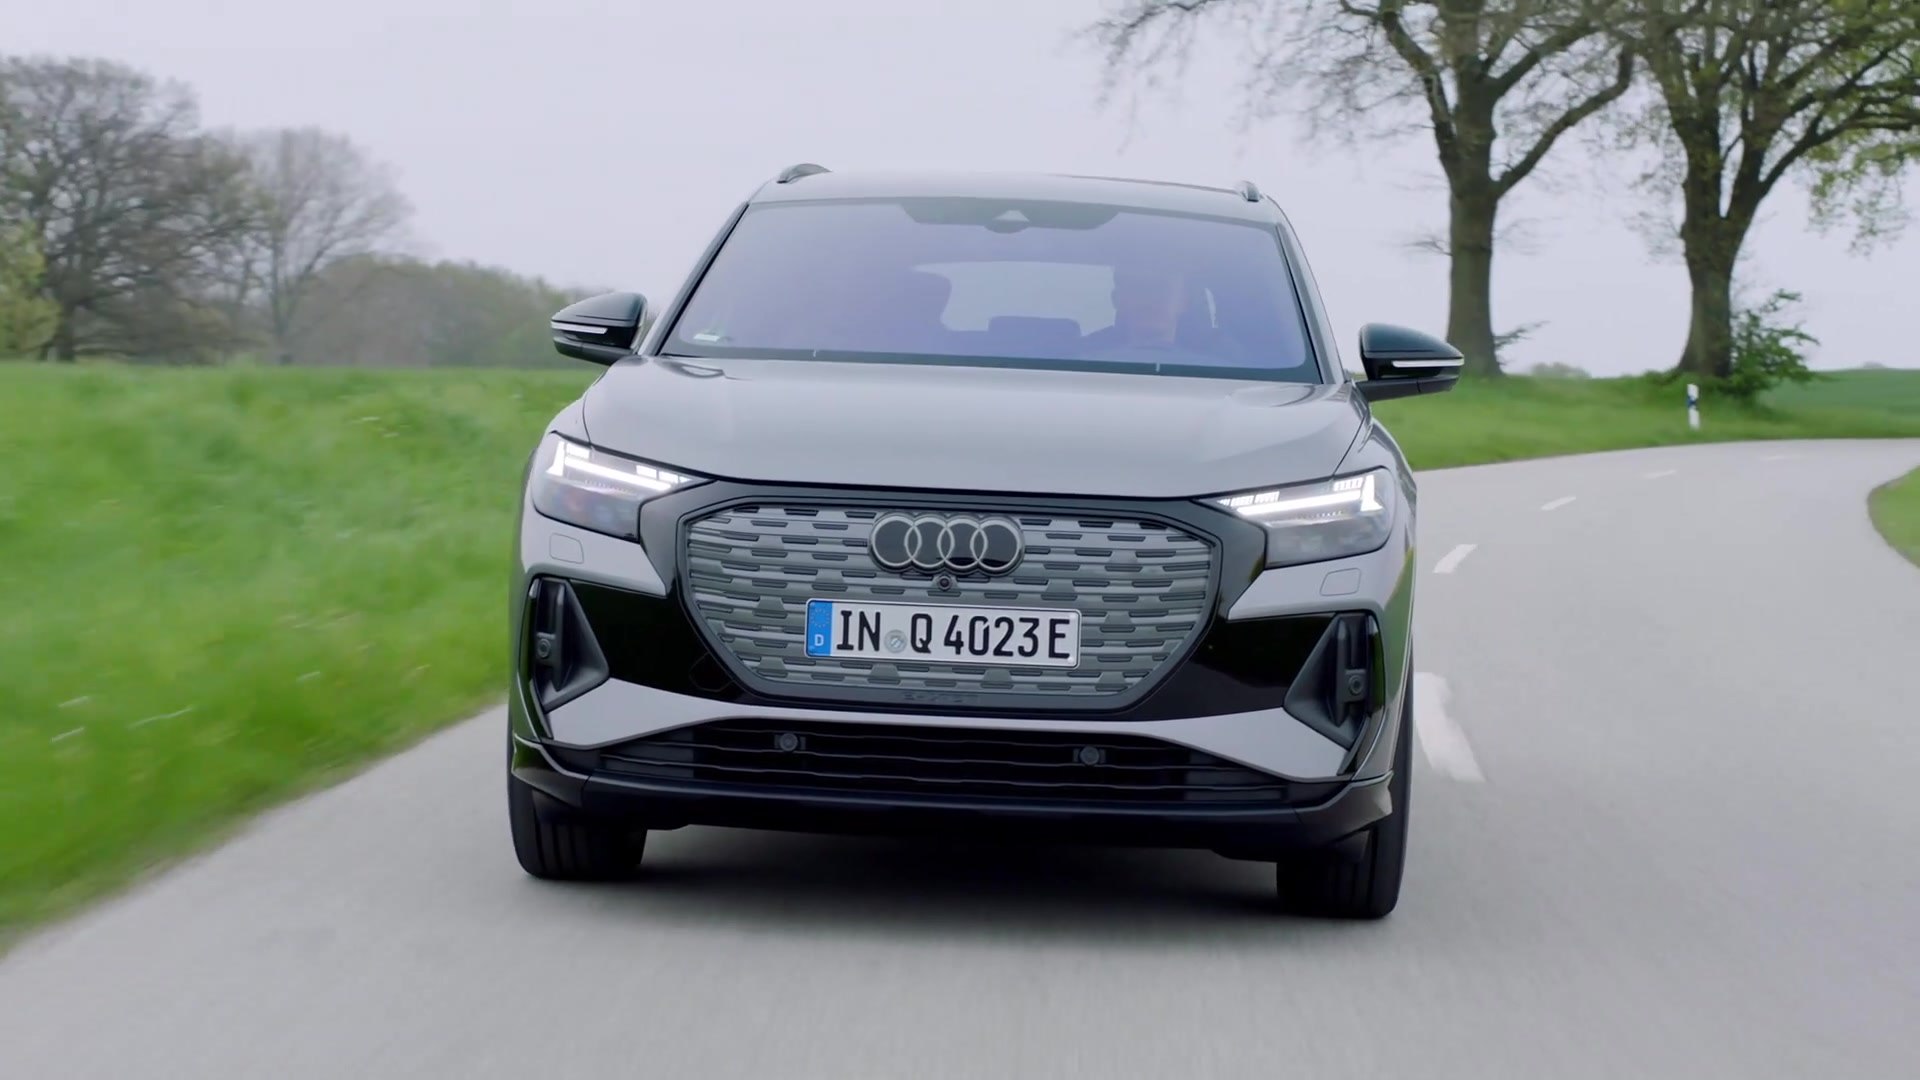 Audi Q4 e-tron in Typhoon grey Driving Video - video Dailymotion